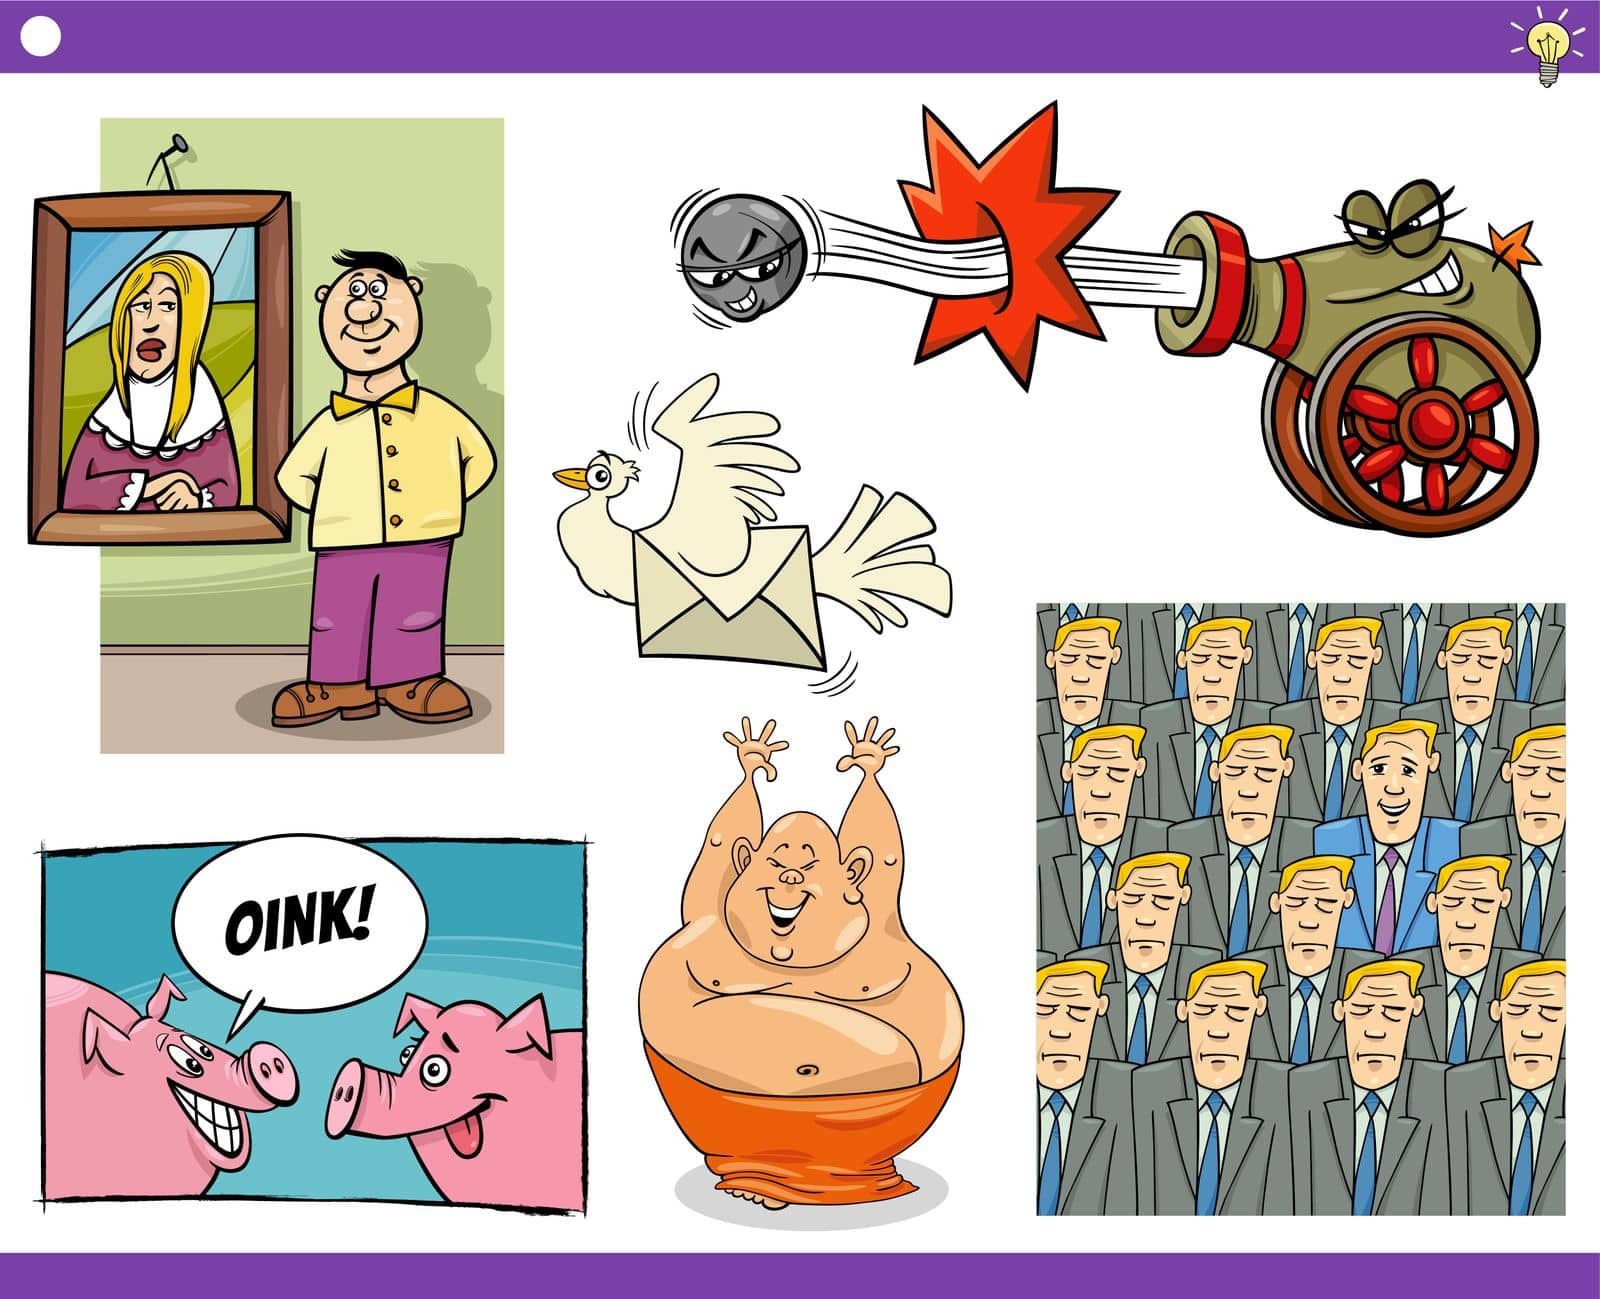 Illustration set of humorous cartoon concepts or metaphors or proverbs with comic characters